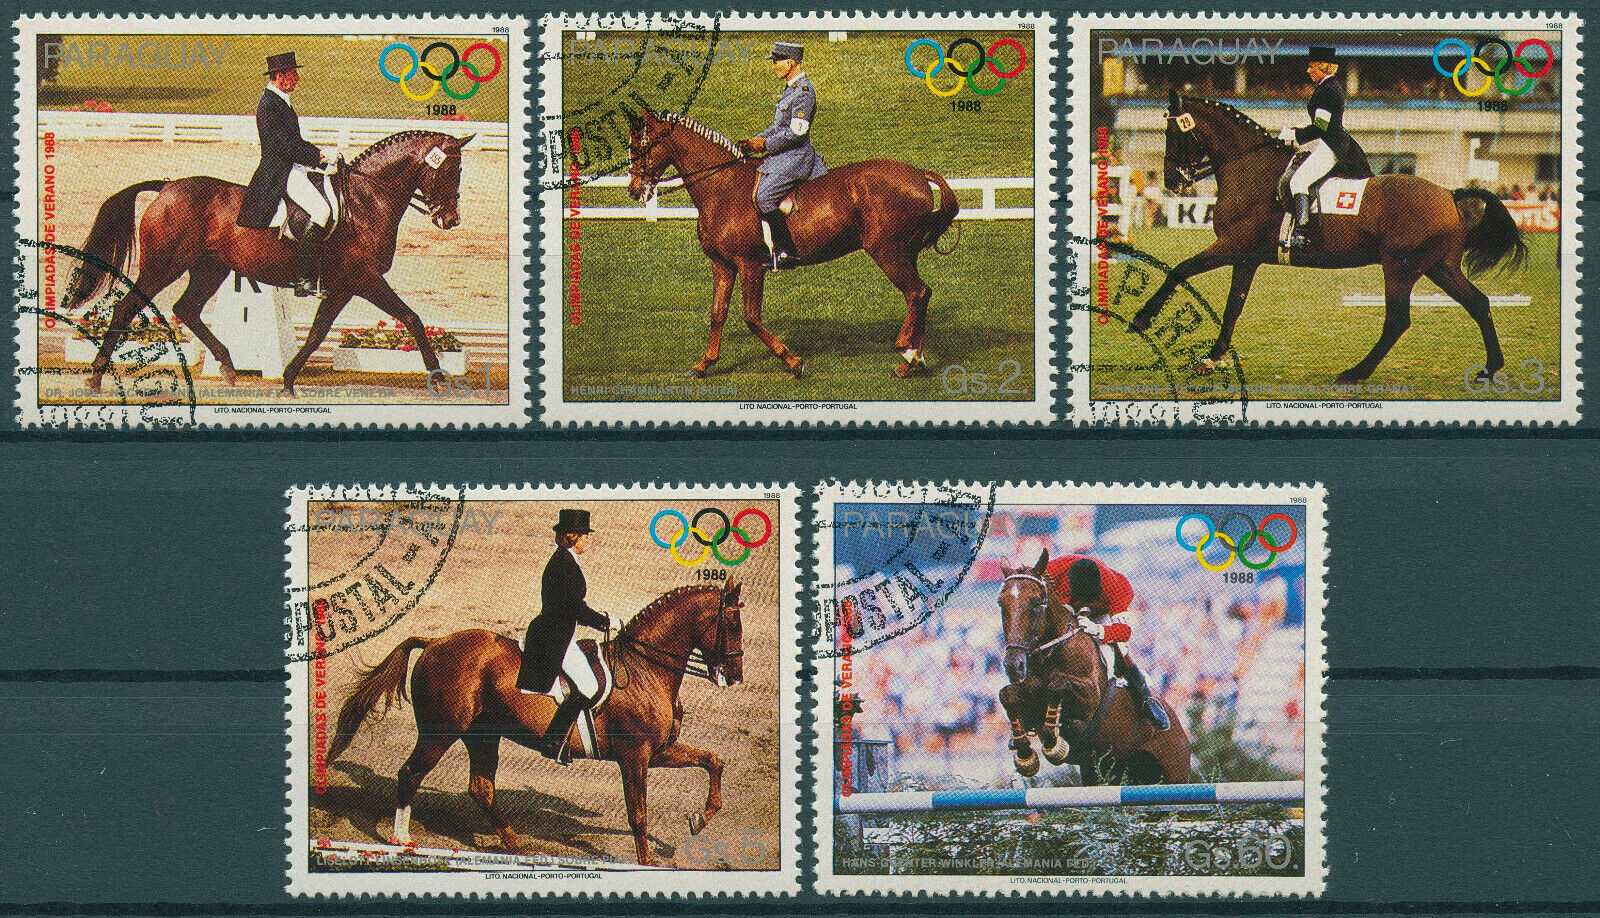 Paraguay 1988 CTO Olympics Stamps Summer Games Seoul 1988 Equestrian 5v Set